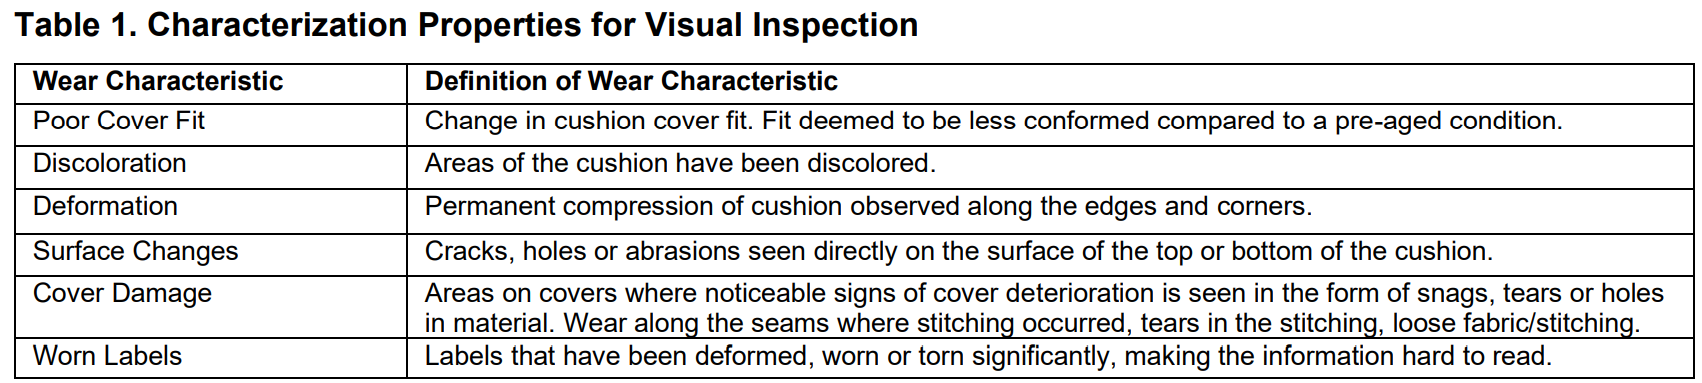 Table 1. Characterization Properties for Visual Inspection